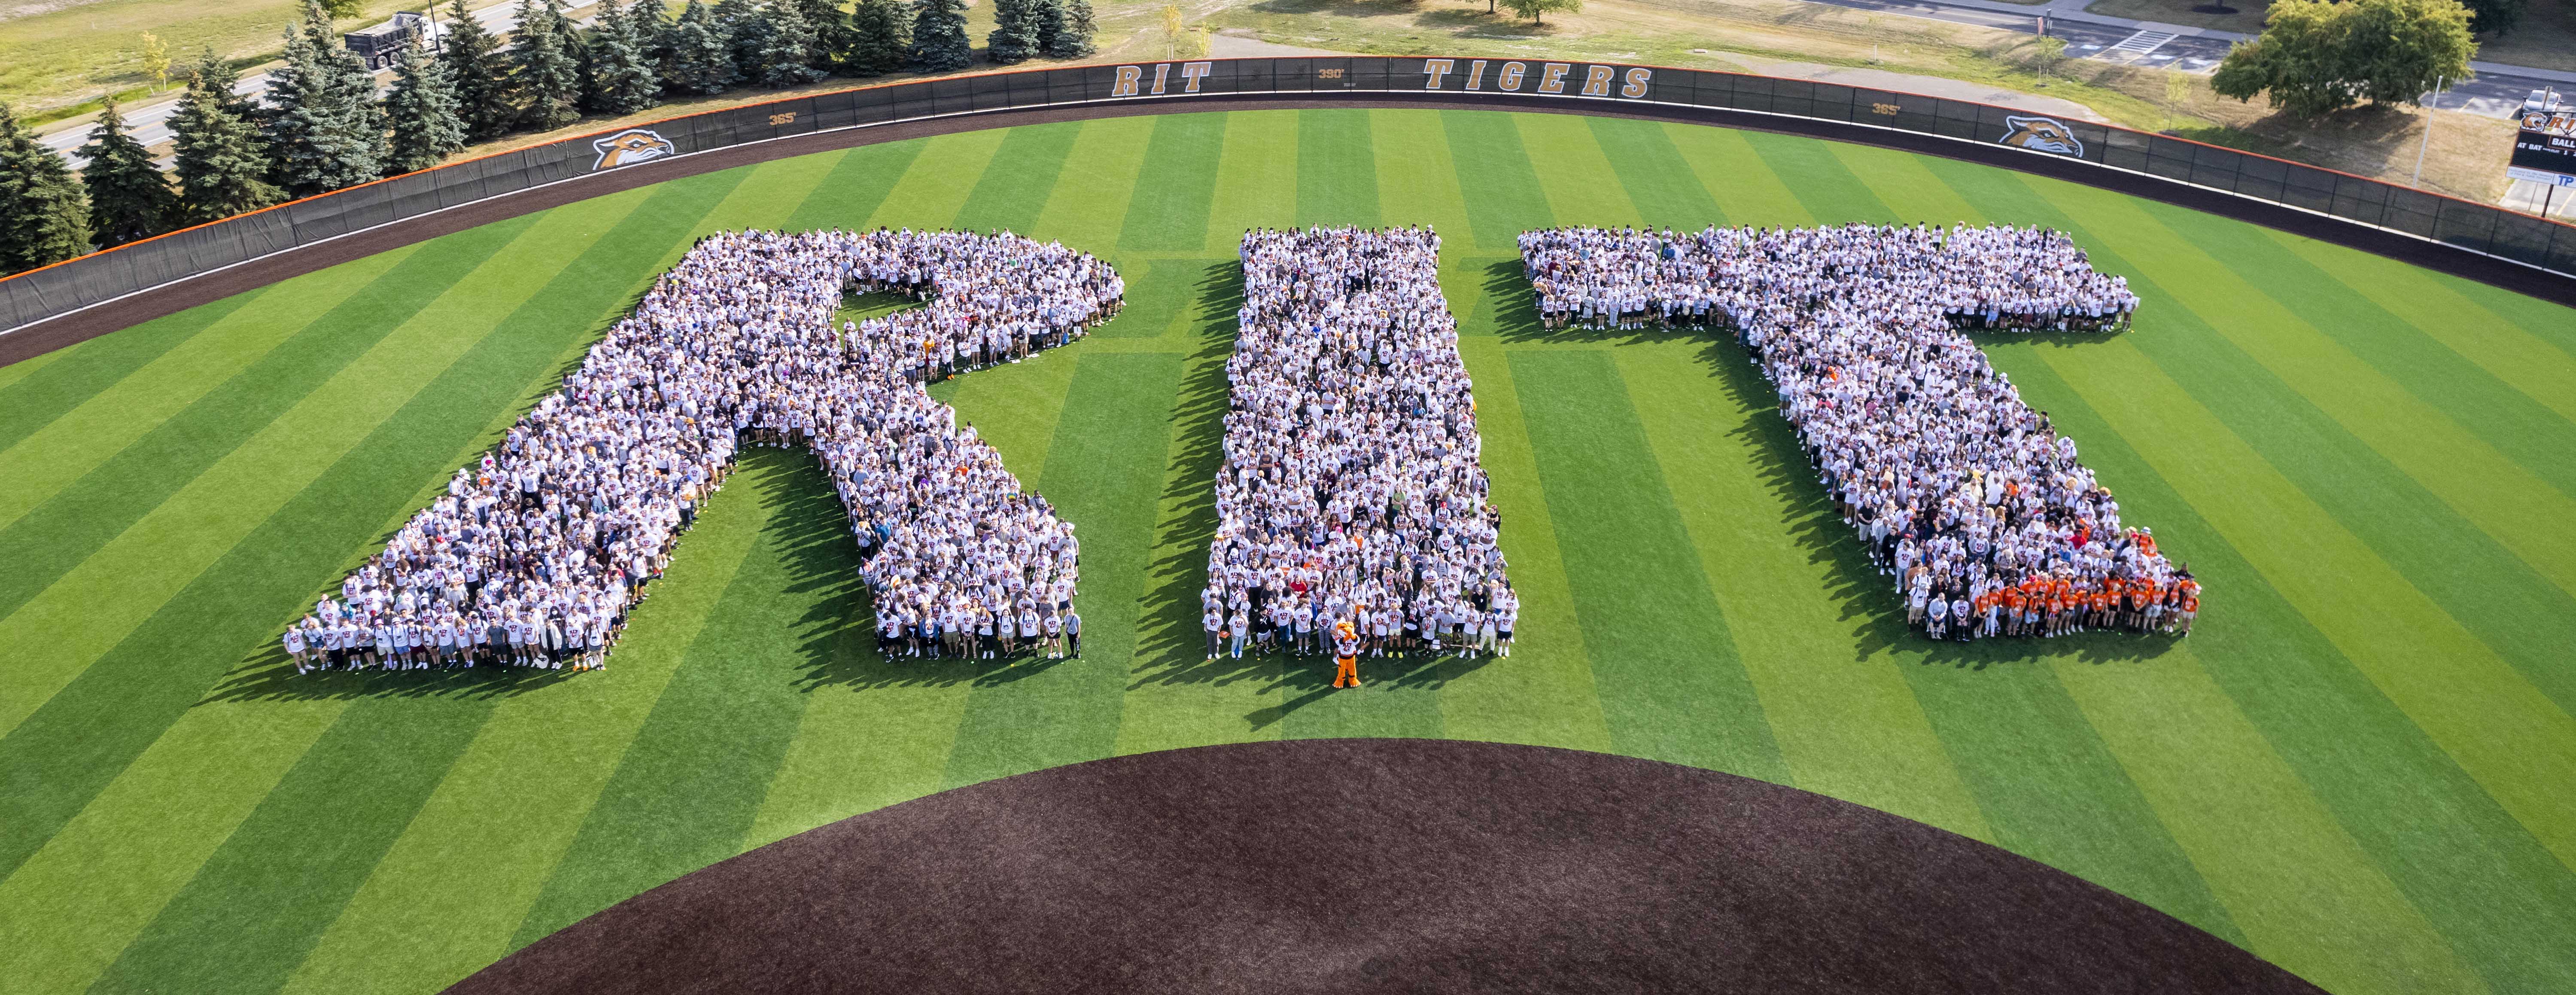 Group photo of RIT Students in the shape of RIT on baseball field